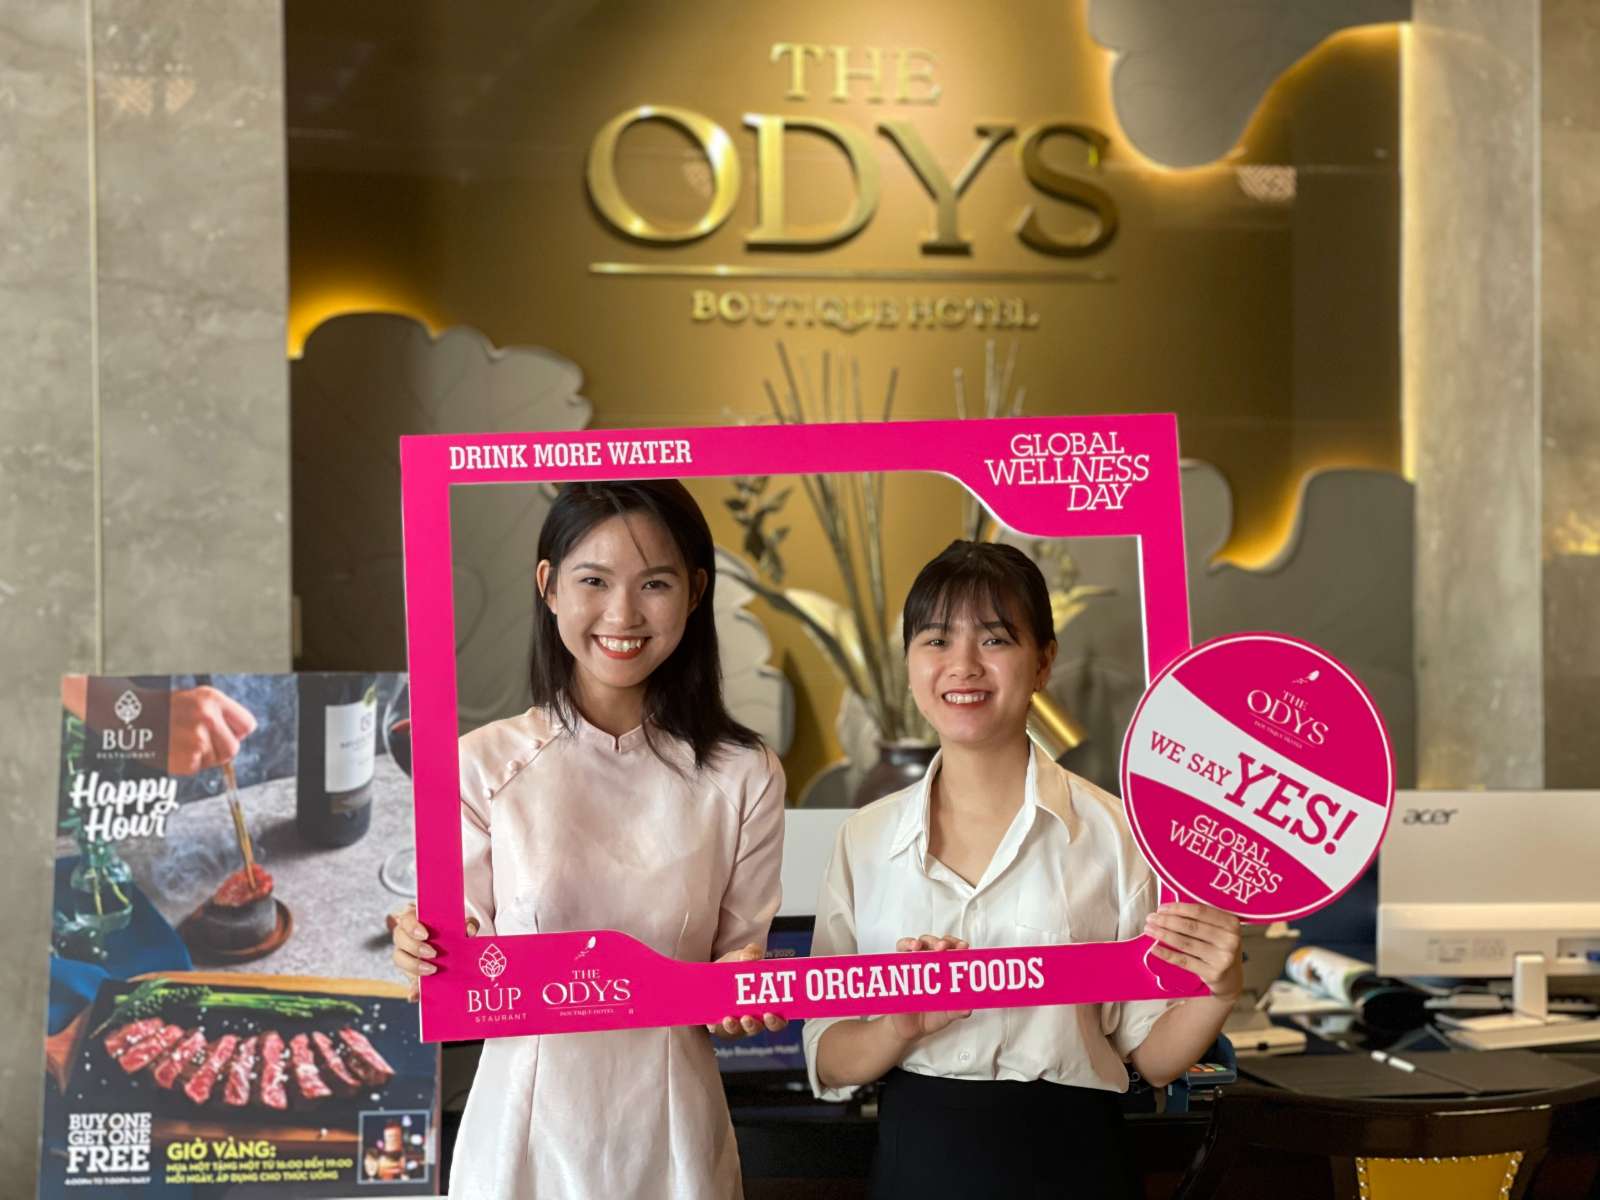 The Odys Boutique Hotel, Sống khoẻ toàn diện